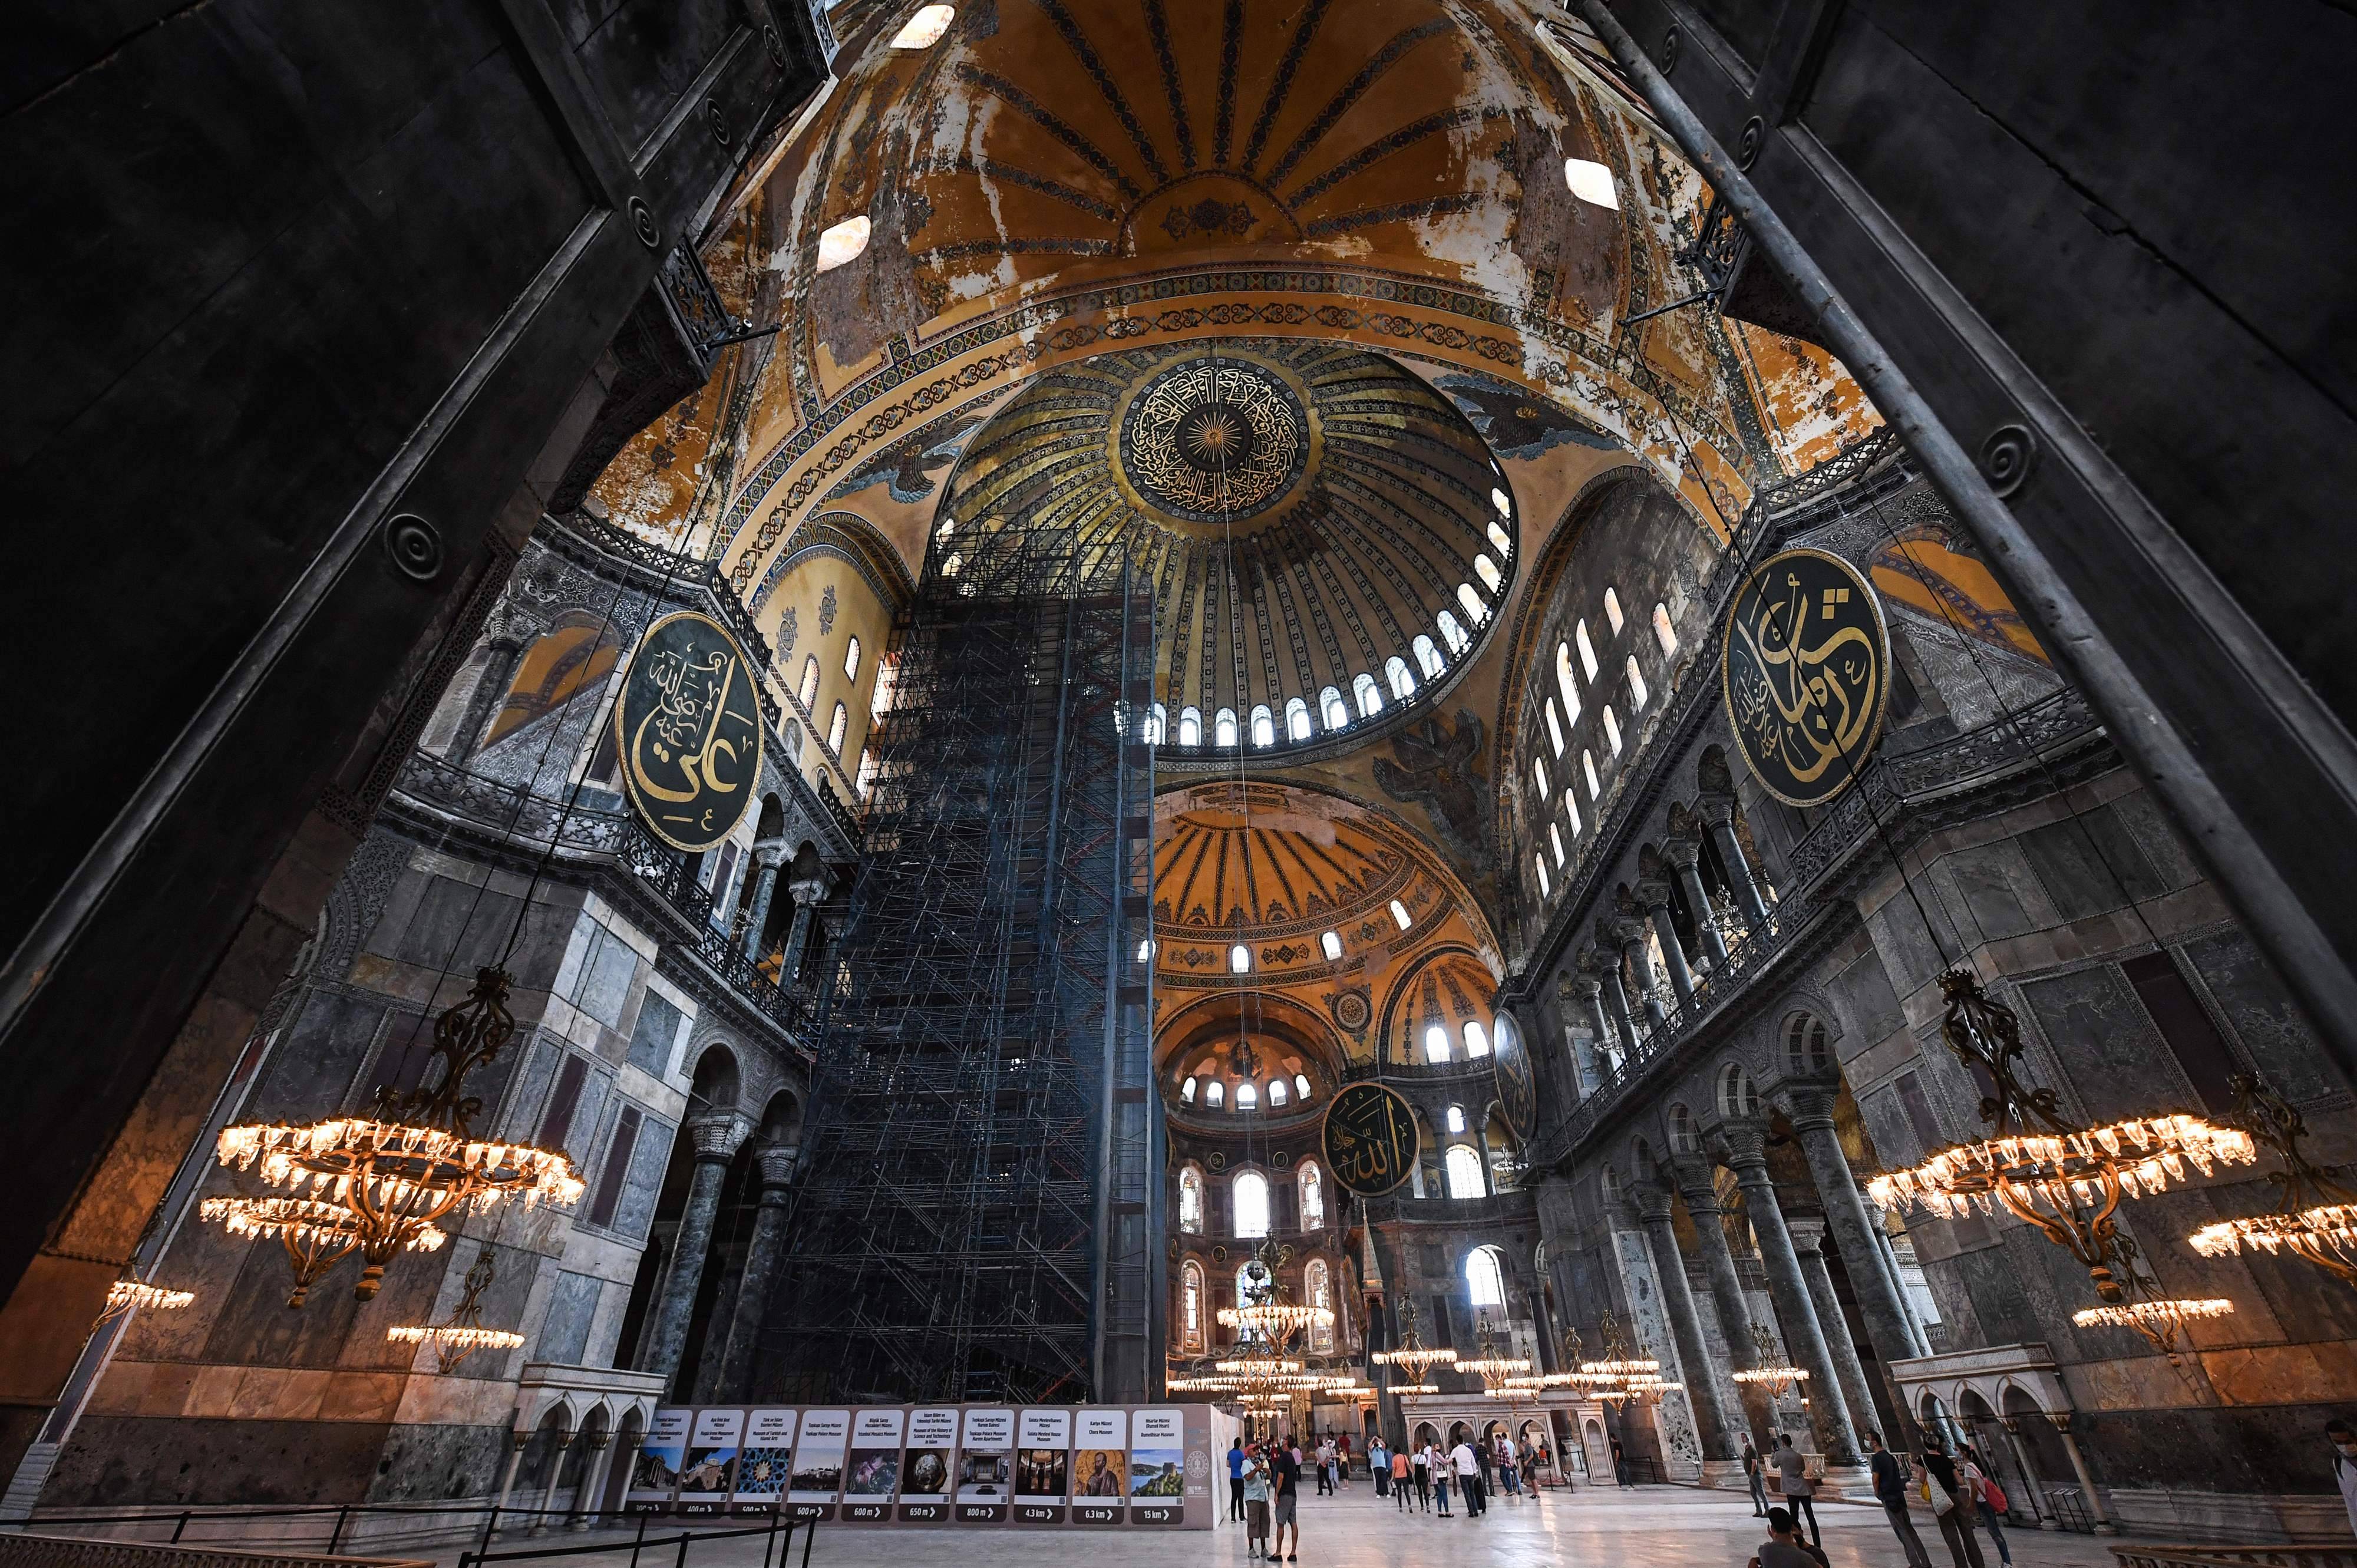 Tourists visit the Hagia Sophia in Istanbul on July 10. (Ozan Kose/AFP/Getty Images)